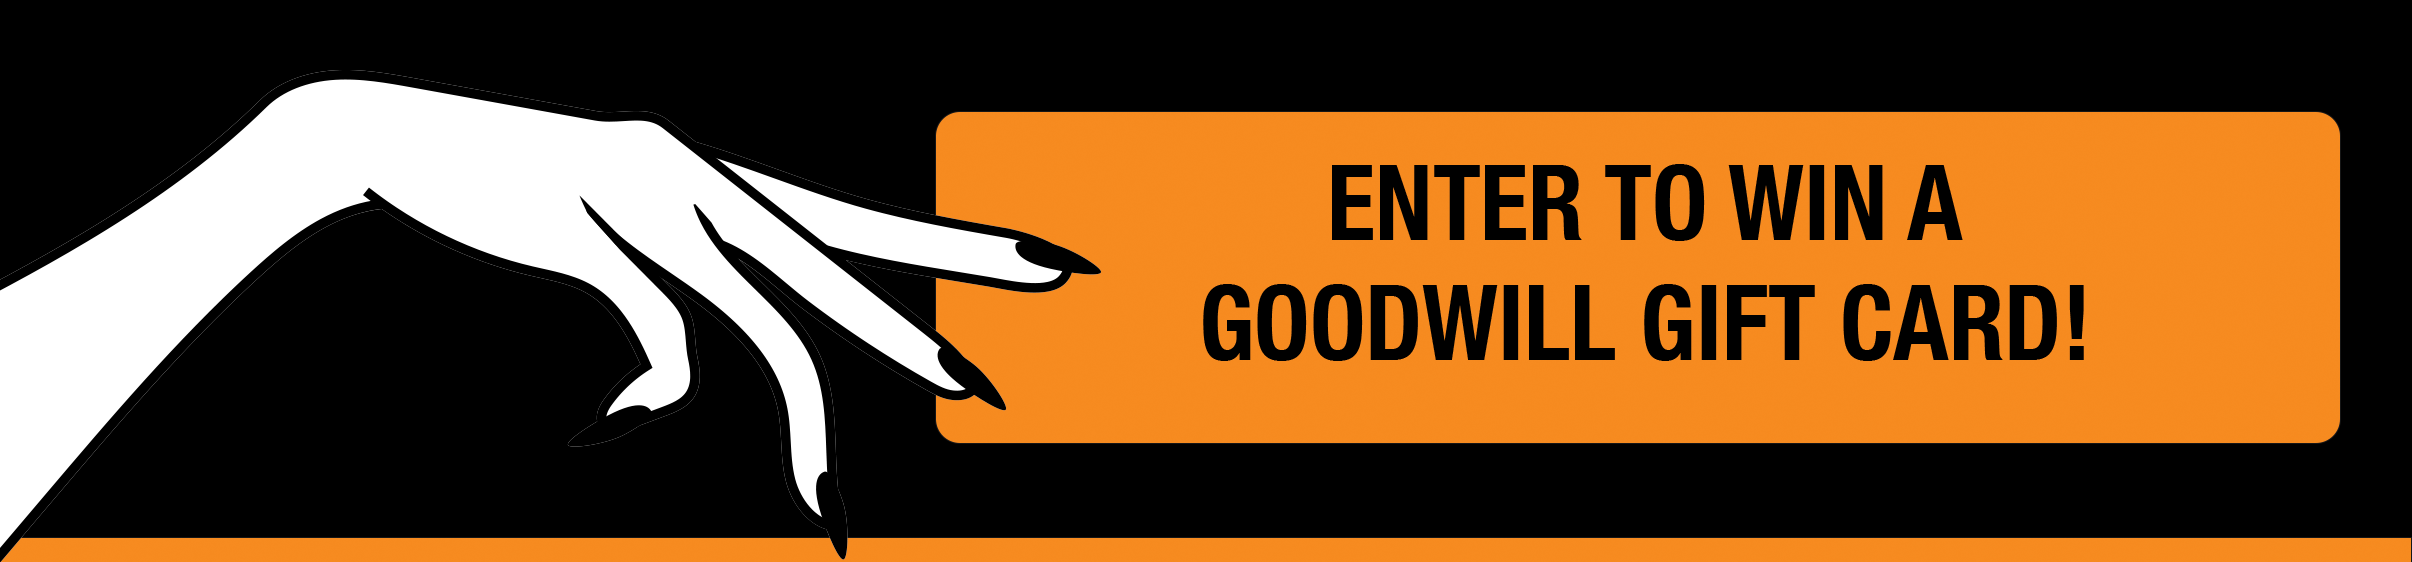 Hand point to a sign that says 'Enter to win a Goodwill gift card!"